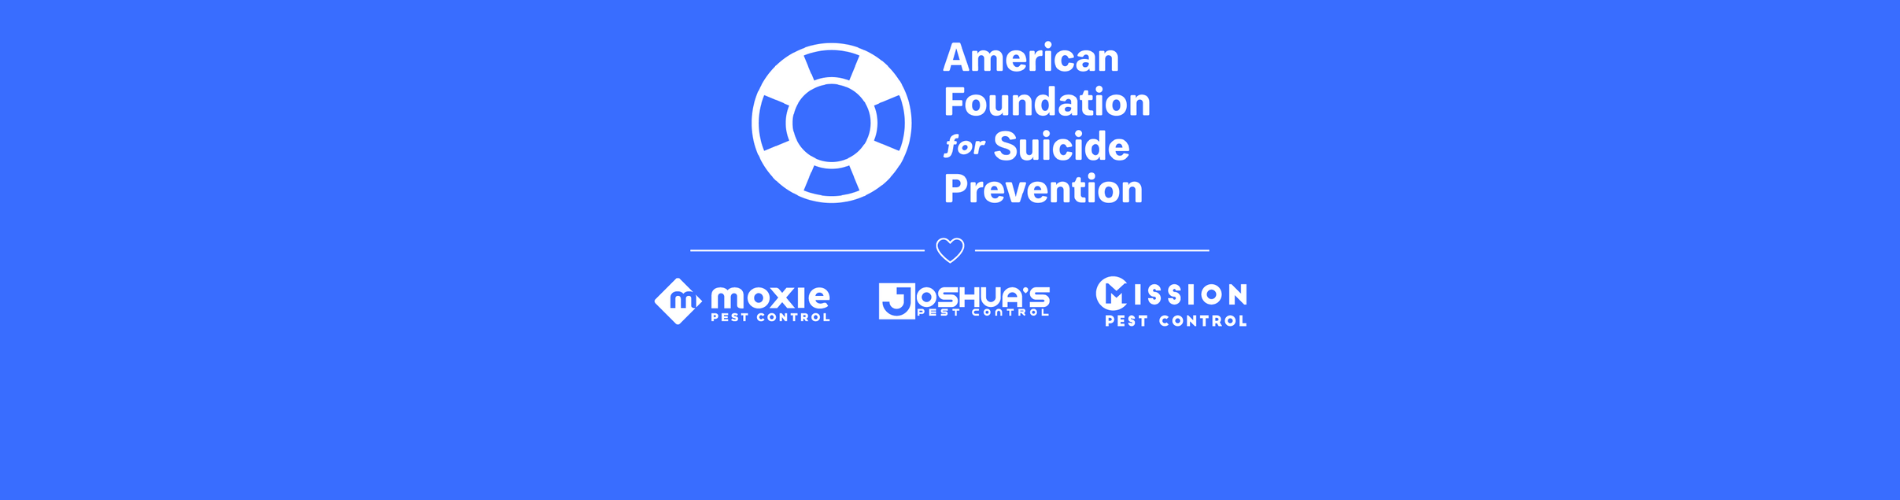 Moxie Partners with the American Foundation for Suicide Prevention